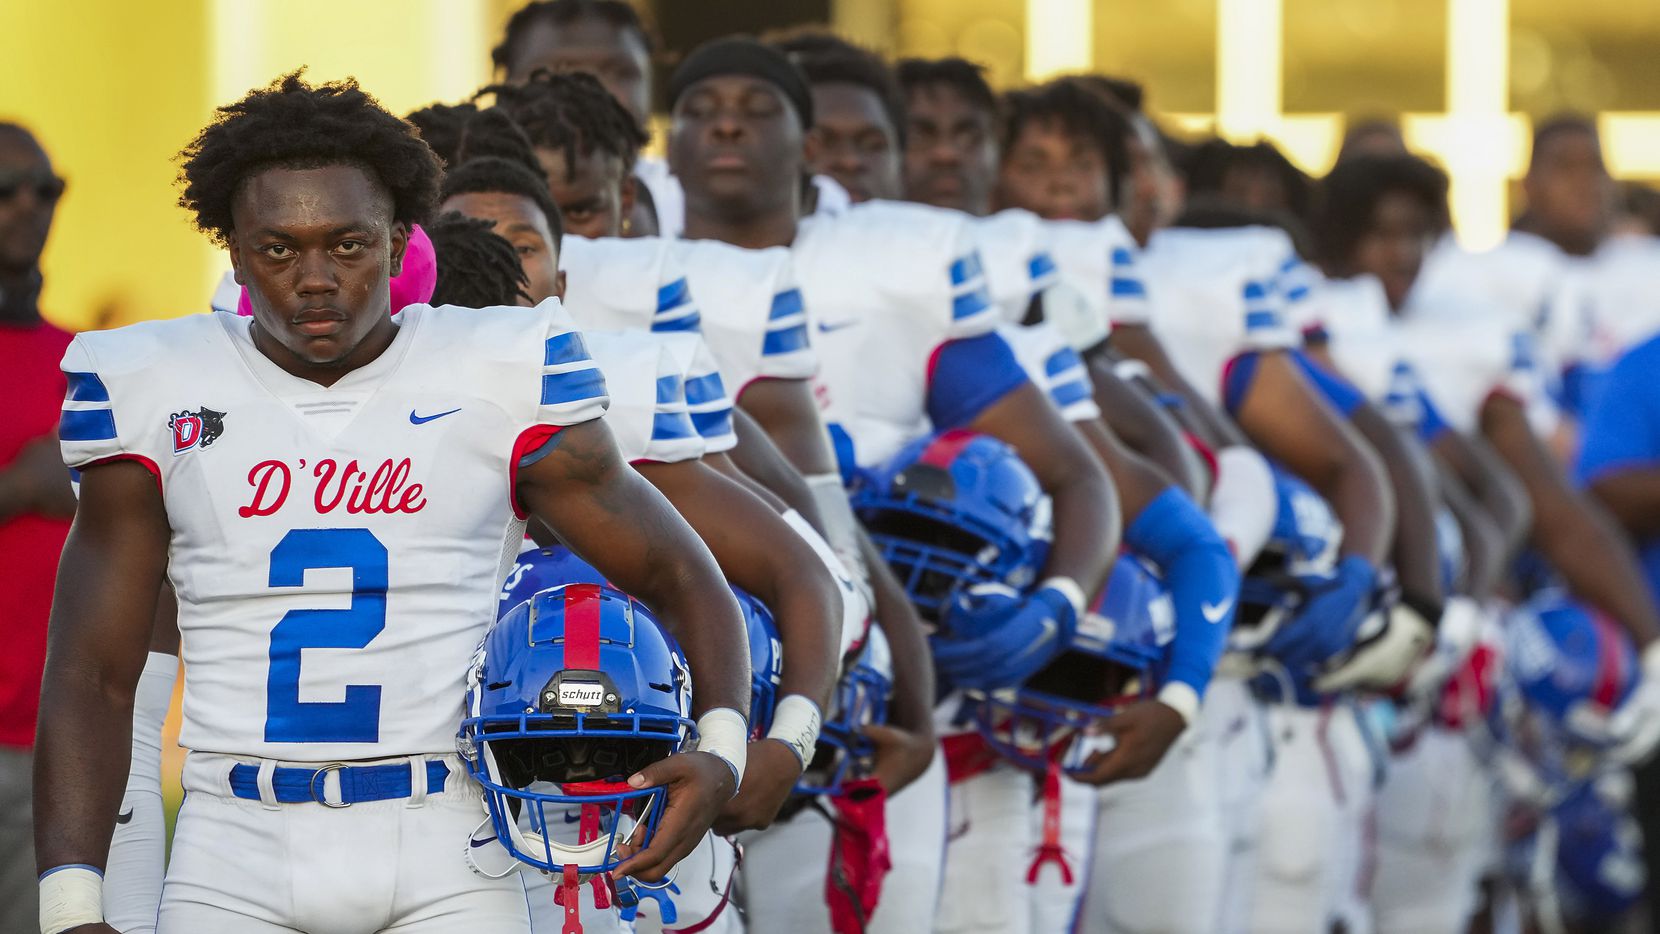 Duncanville linebacker Jordan Crook (2) stands with teammates for the national anthem before a high school football game against Mater Dei on Friday, Aug. 27, 2021, in Duncanville. (Smiley N. Pool/The Dallas Morning News)